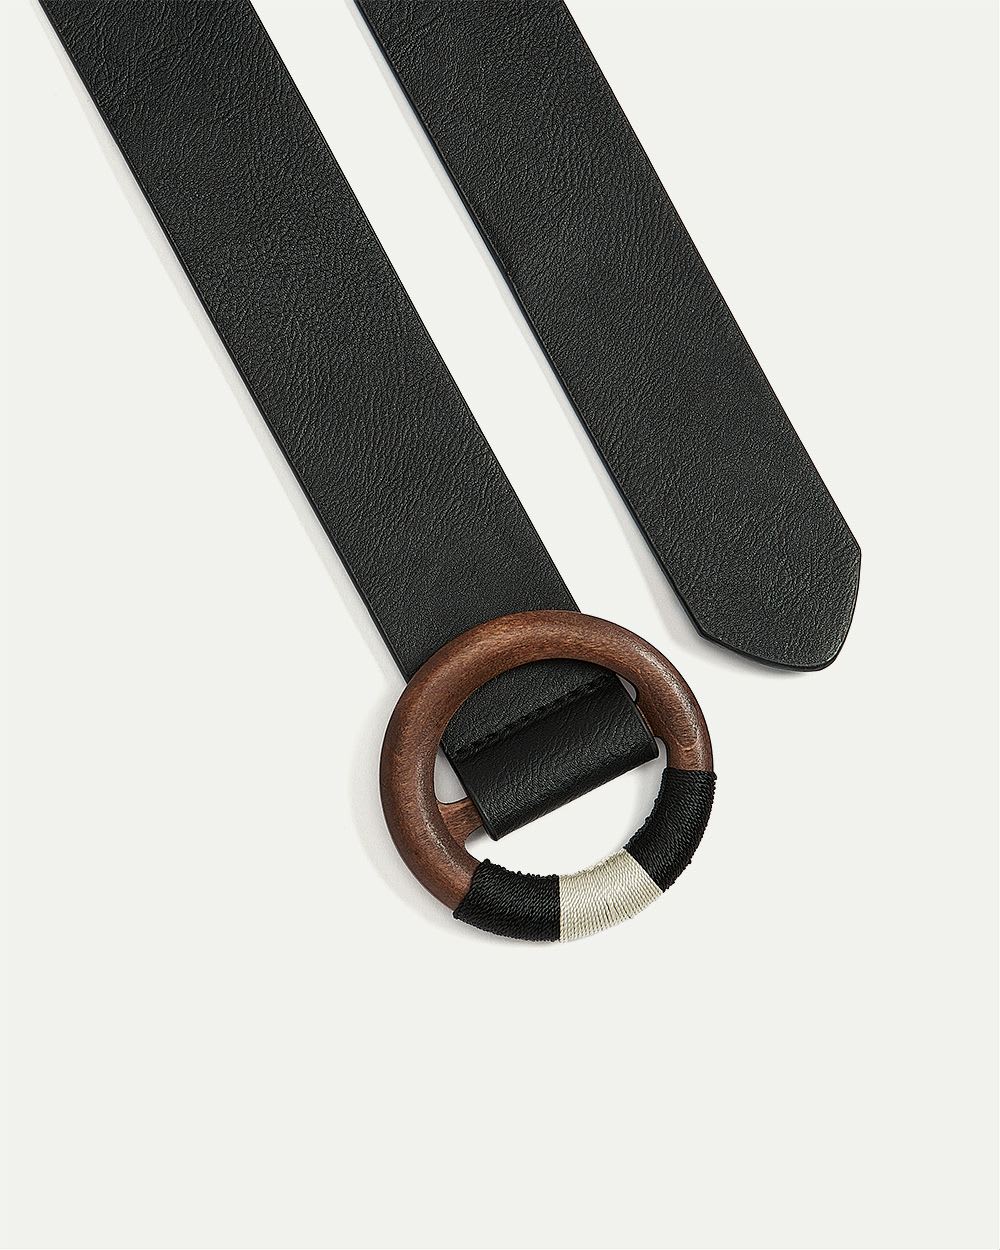 Elastic Belt with Round Wood Buckle